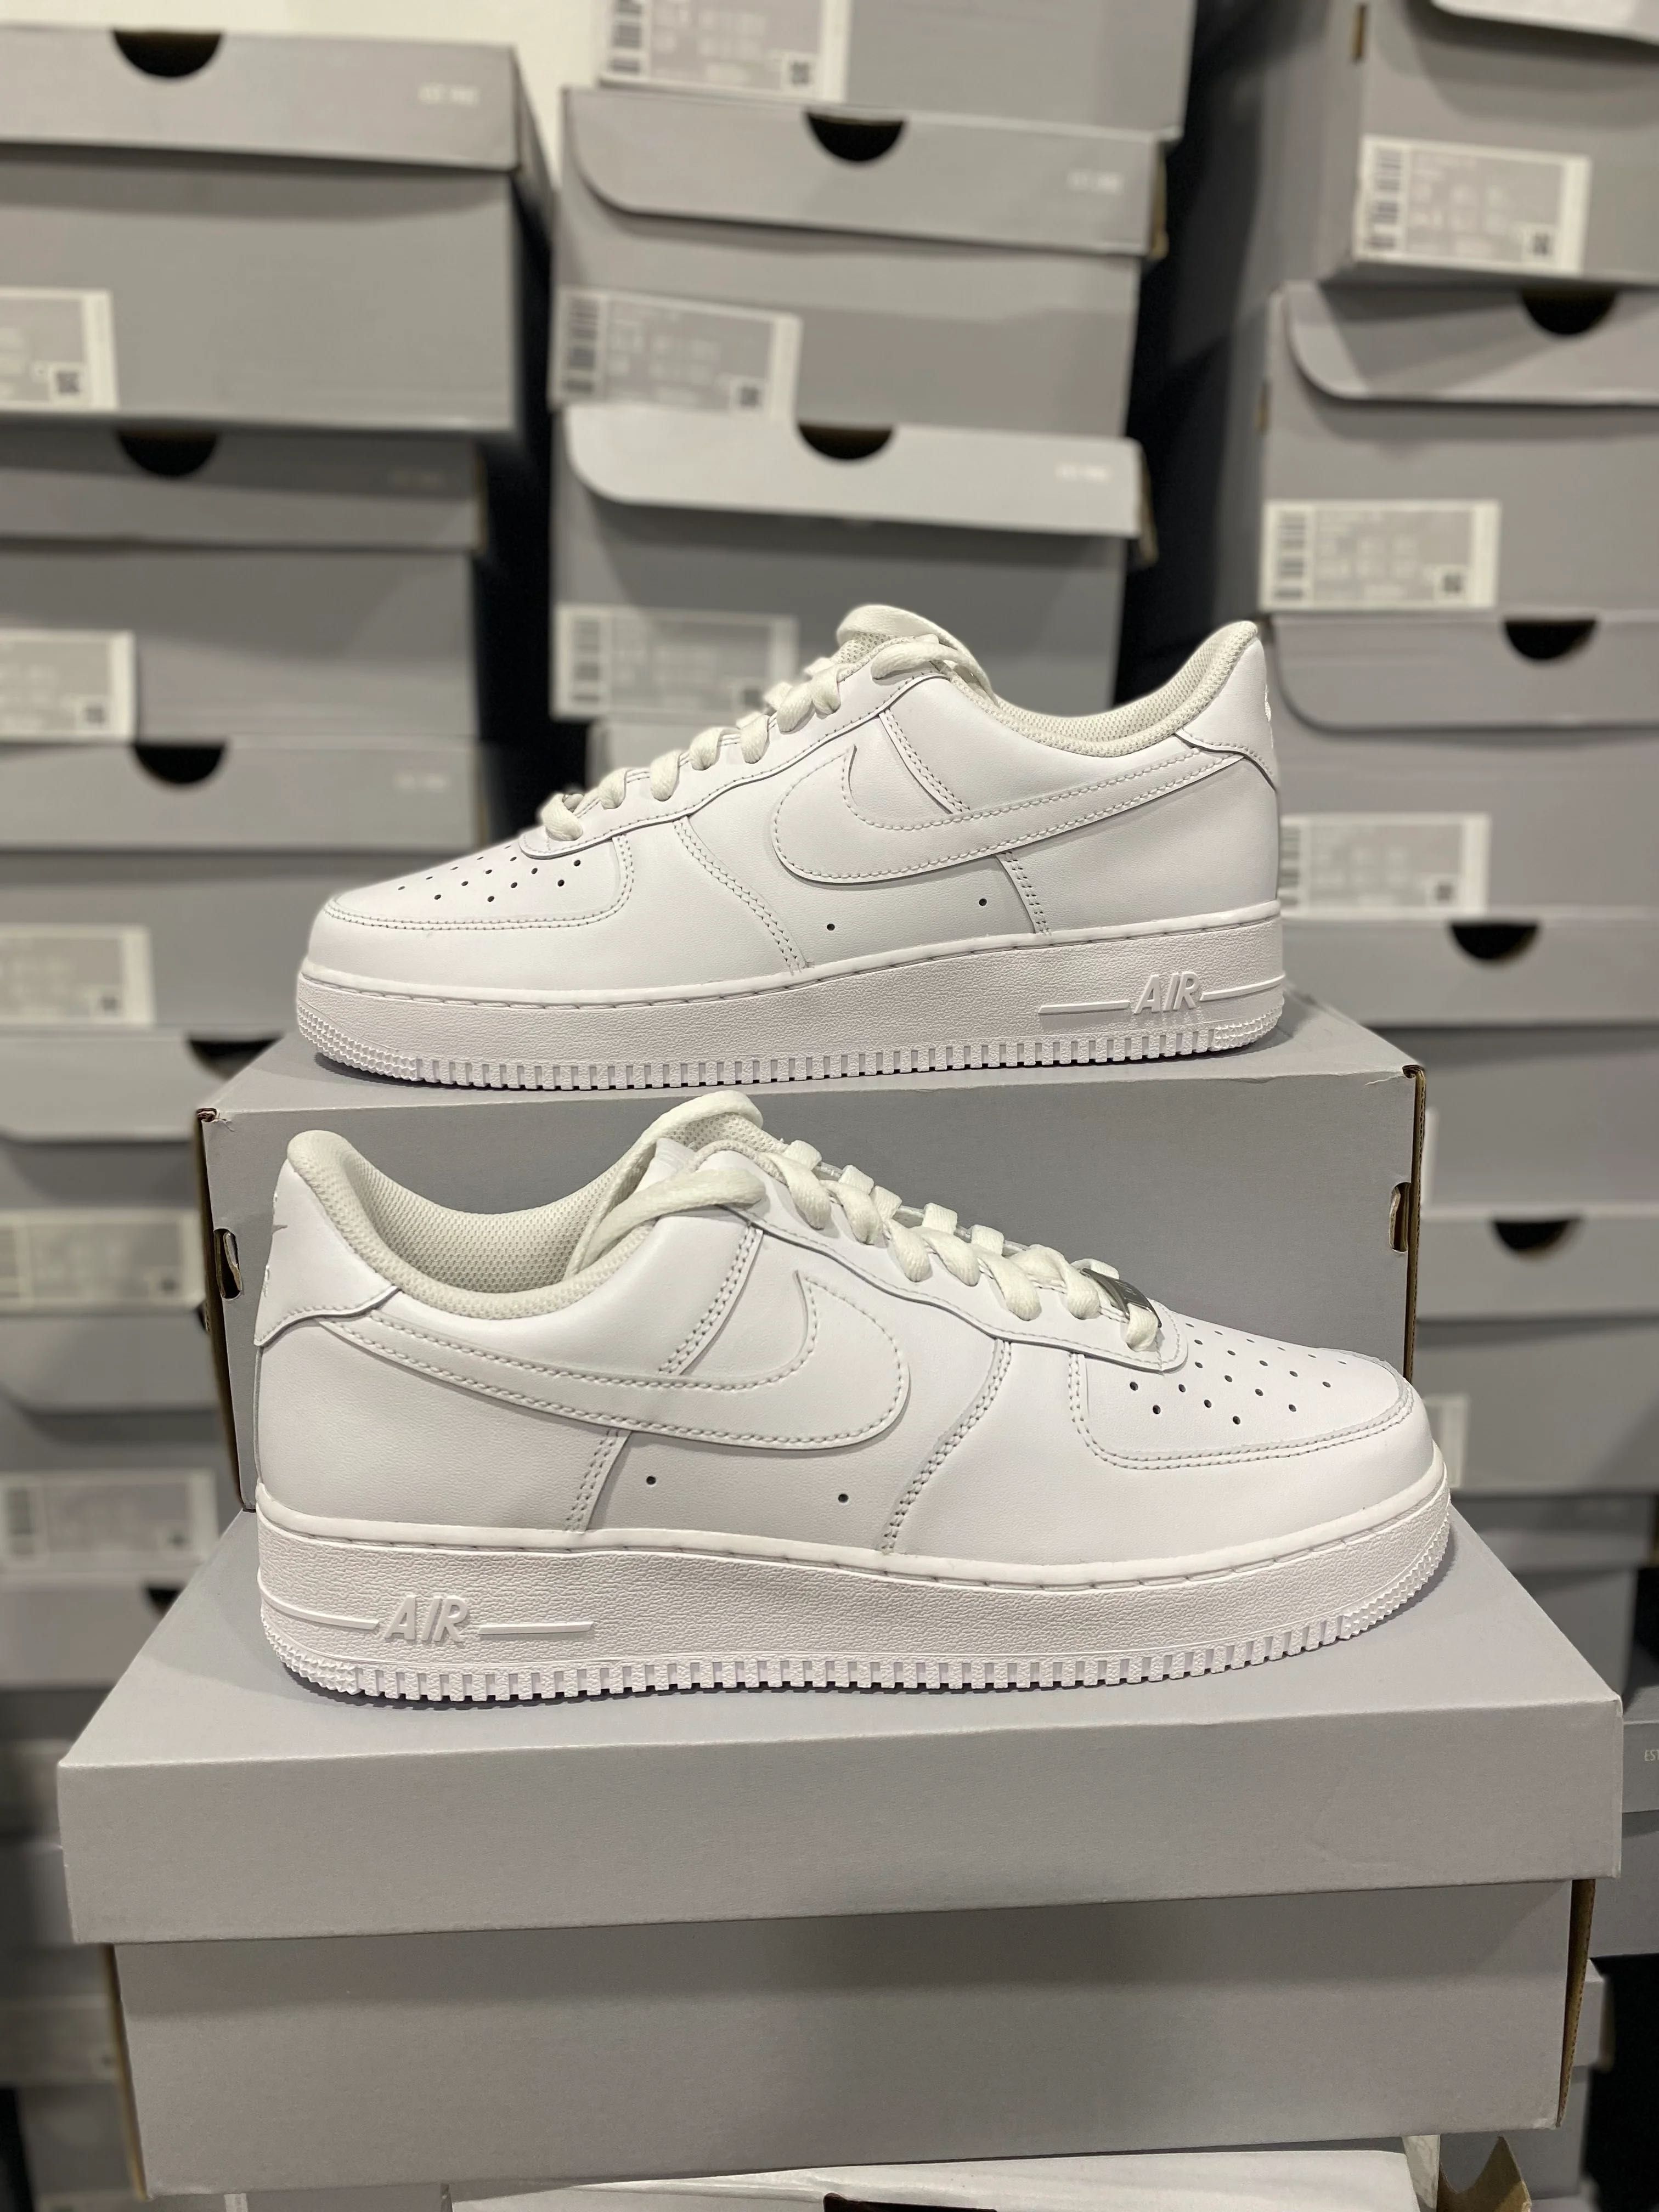 Nike Air Force One 1 Low Top White Adidasi Unisex - OFERTA